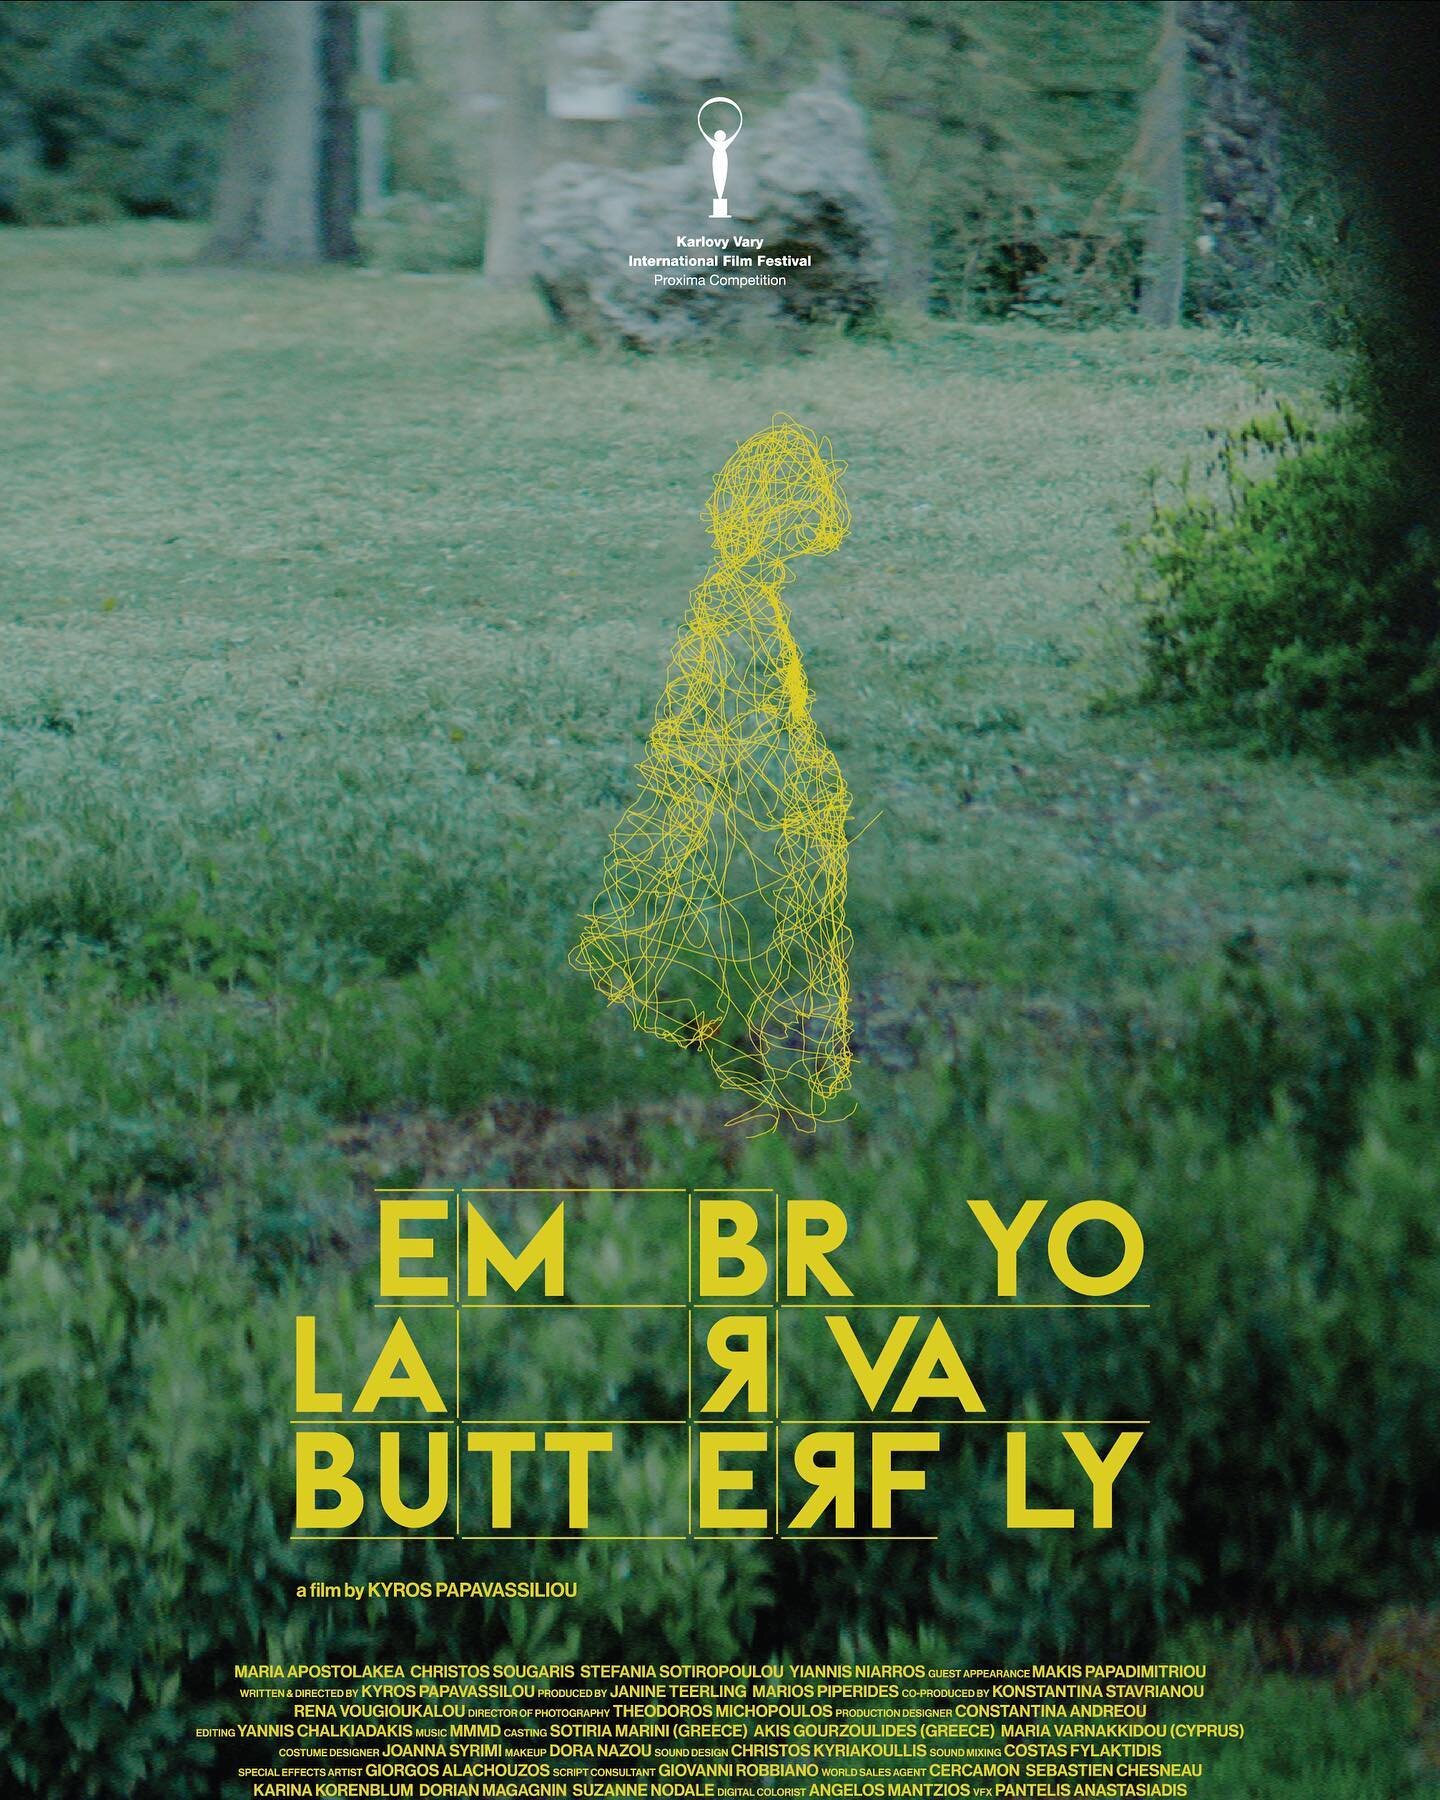 The poster of Embryo Larva Butterfly is out! @kyrospapavassiliou @kviff @ampfilmworks @greekfilmcentre @ertofficial_